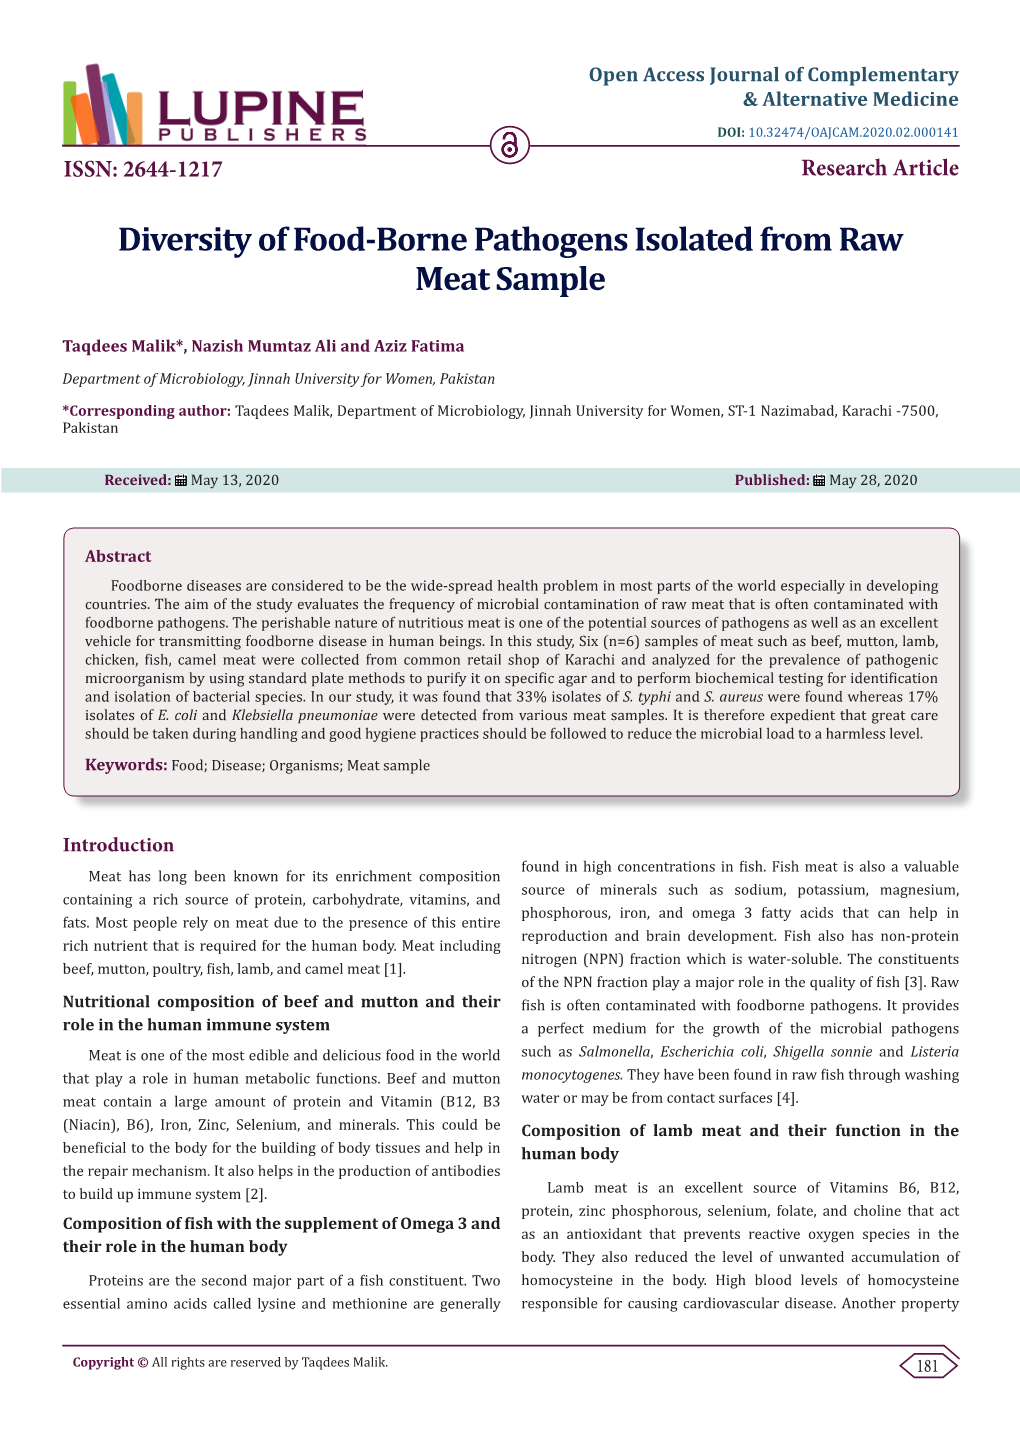 Diversity of Food-Borne Pathogens Isolated from Raw Meat Sample